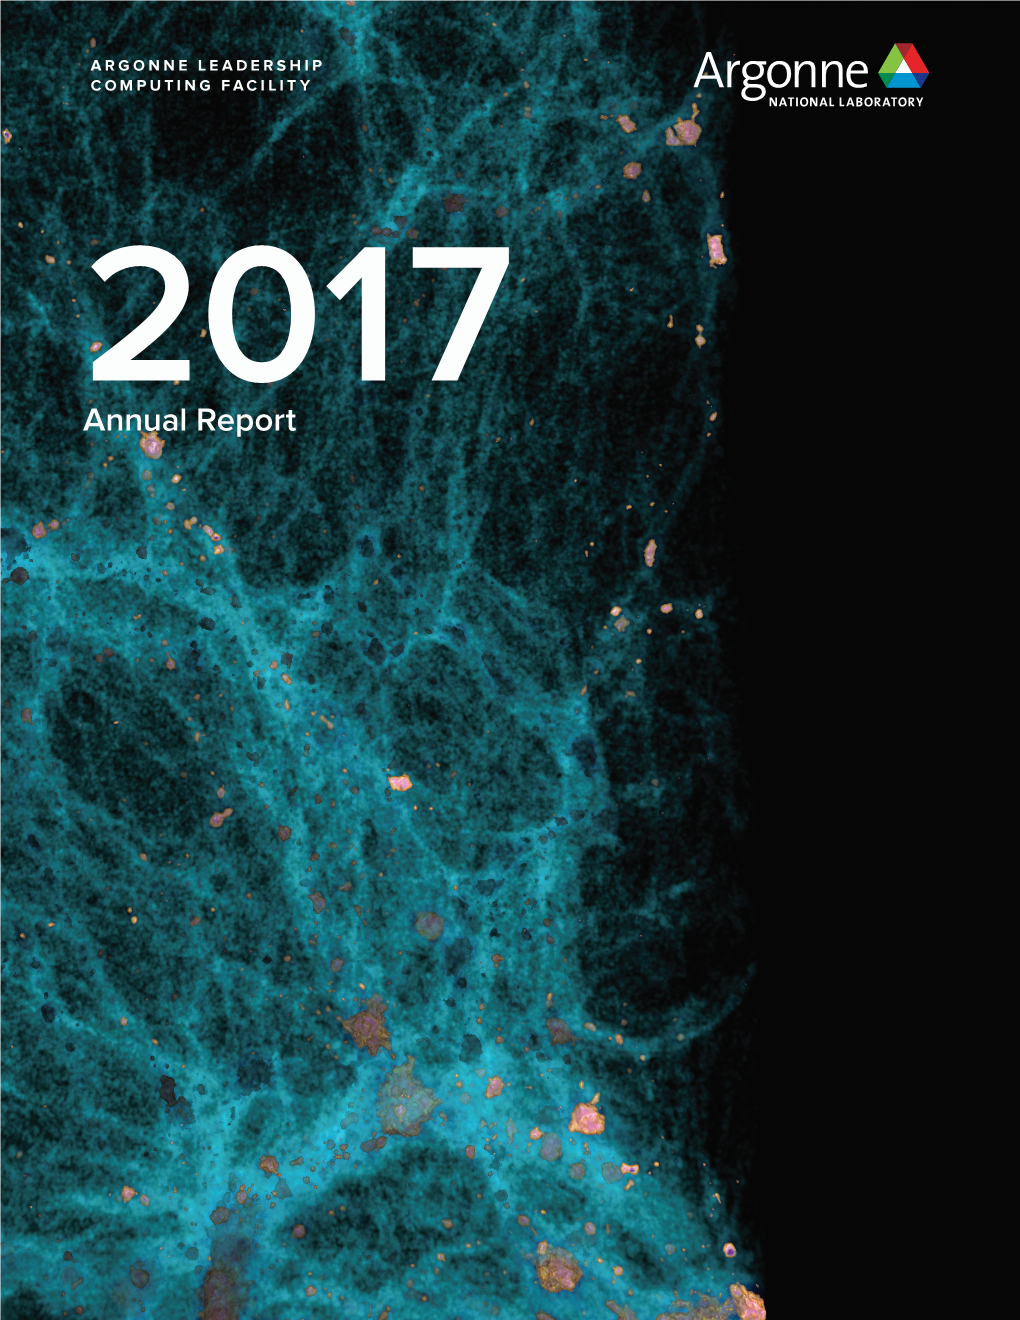 2017 Annual Report on the Cover: This Visualization Shows a Small Portion of a Cosmology Simulation Tracing Structure Formation in the Universe